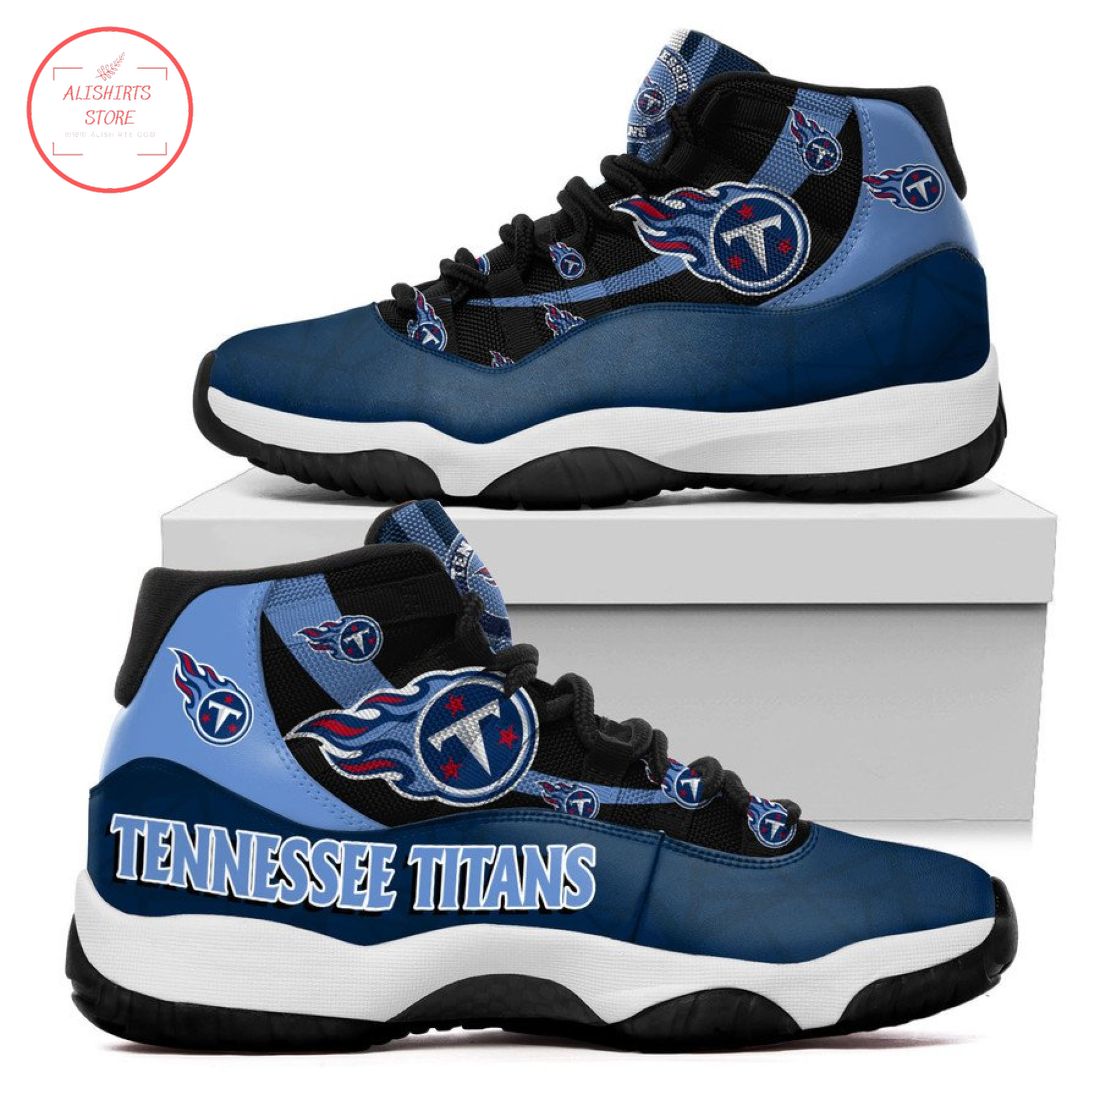 NFL Tennessee Titans New Air Jordan 11 Sneakers Shoes